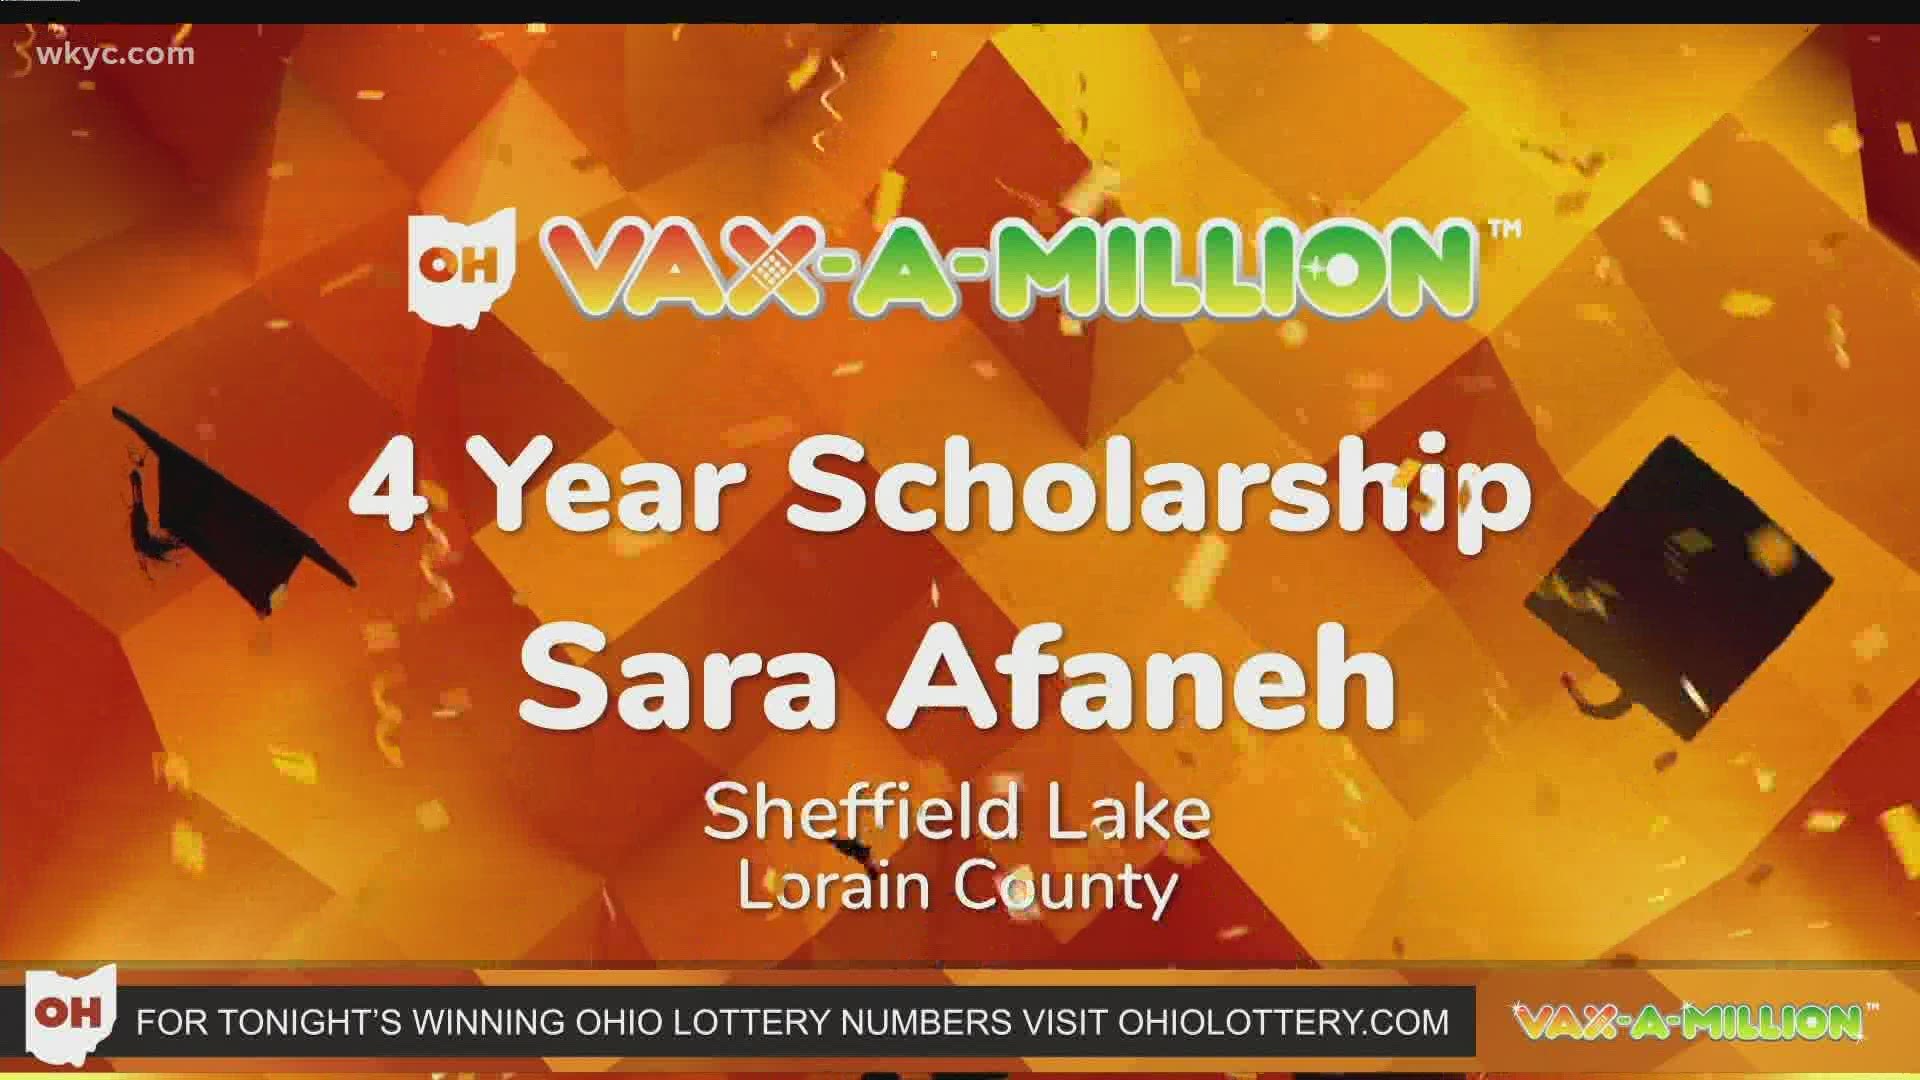 Mark Cline of Richwood captured the $1 million prize. Sara Afaneh of Sheffield Lake was the winner of free, full-ride college scholarship.